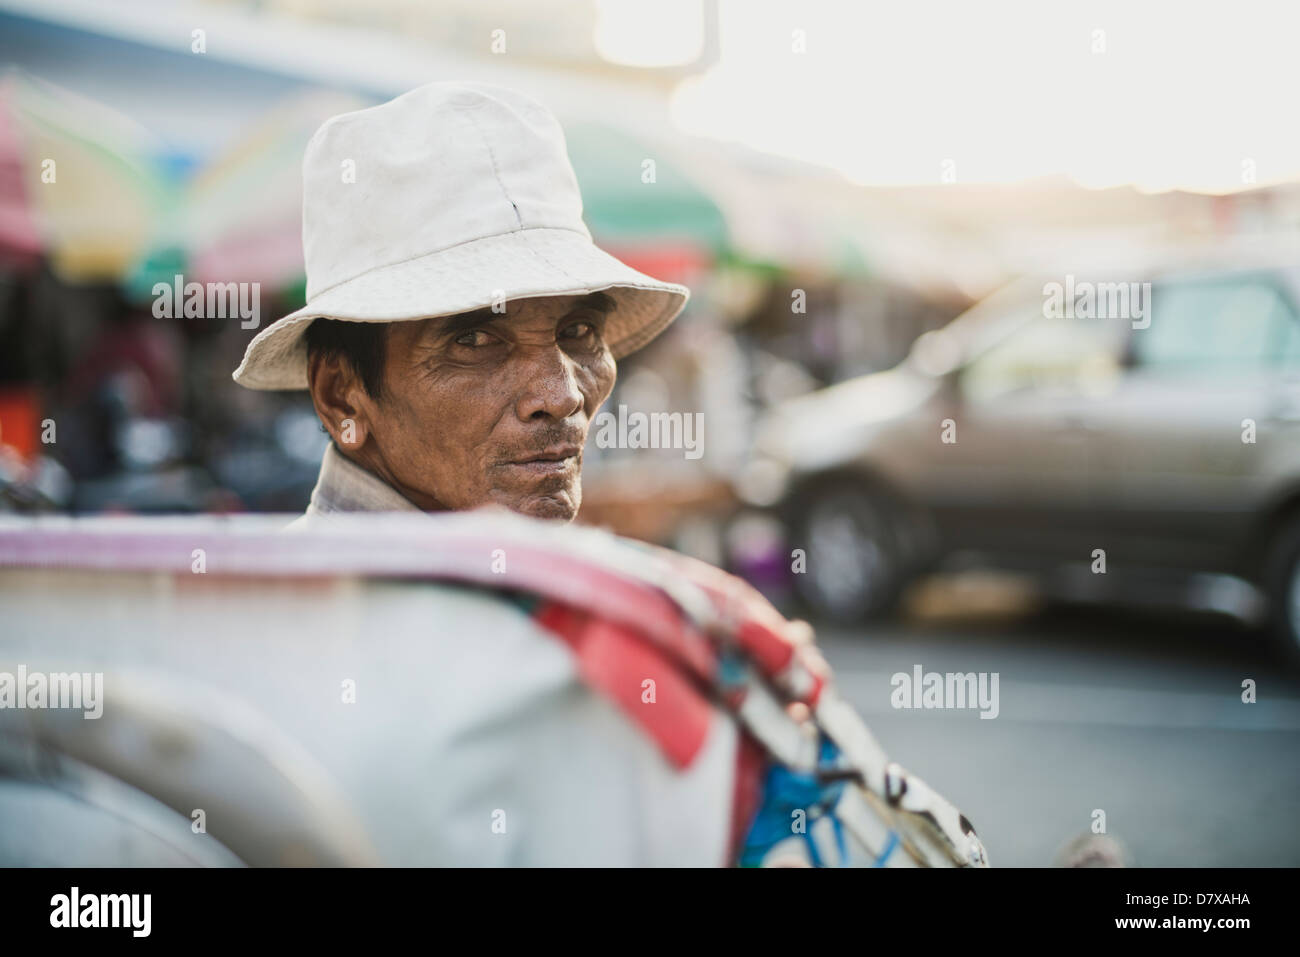 A cyclo driver waiting for customers, Cambodia Stock Photo